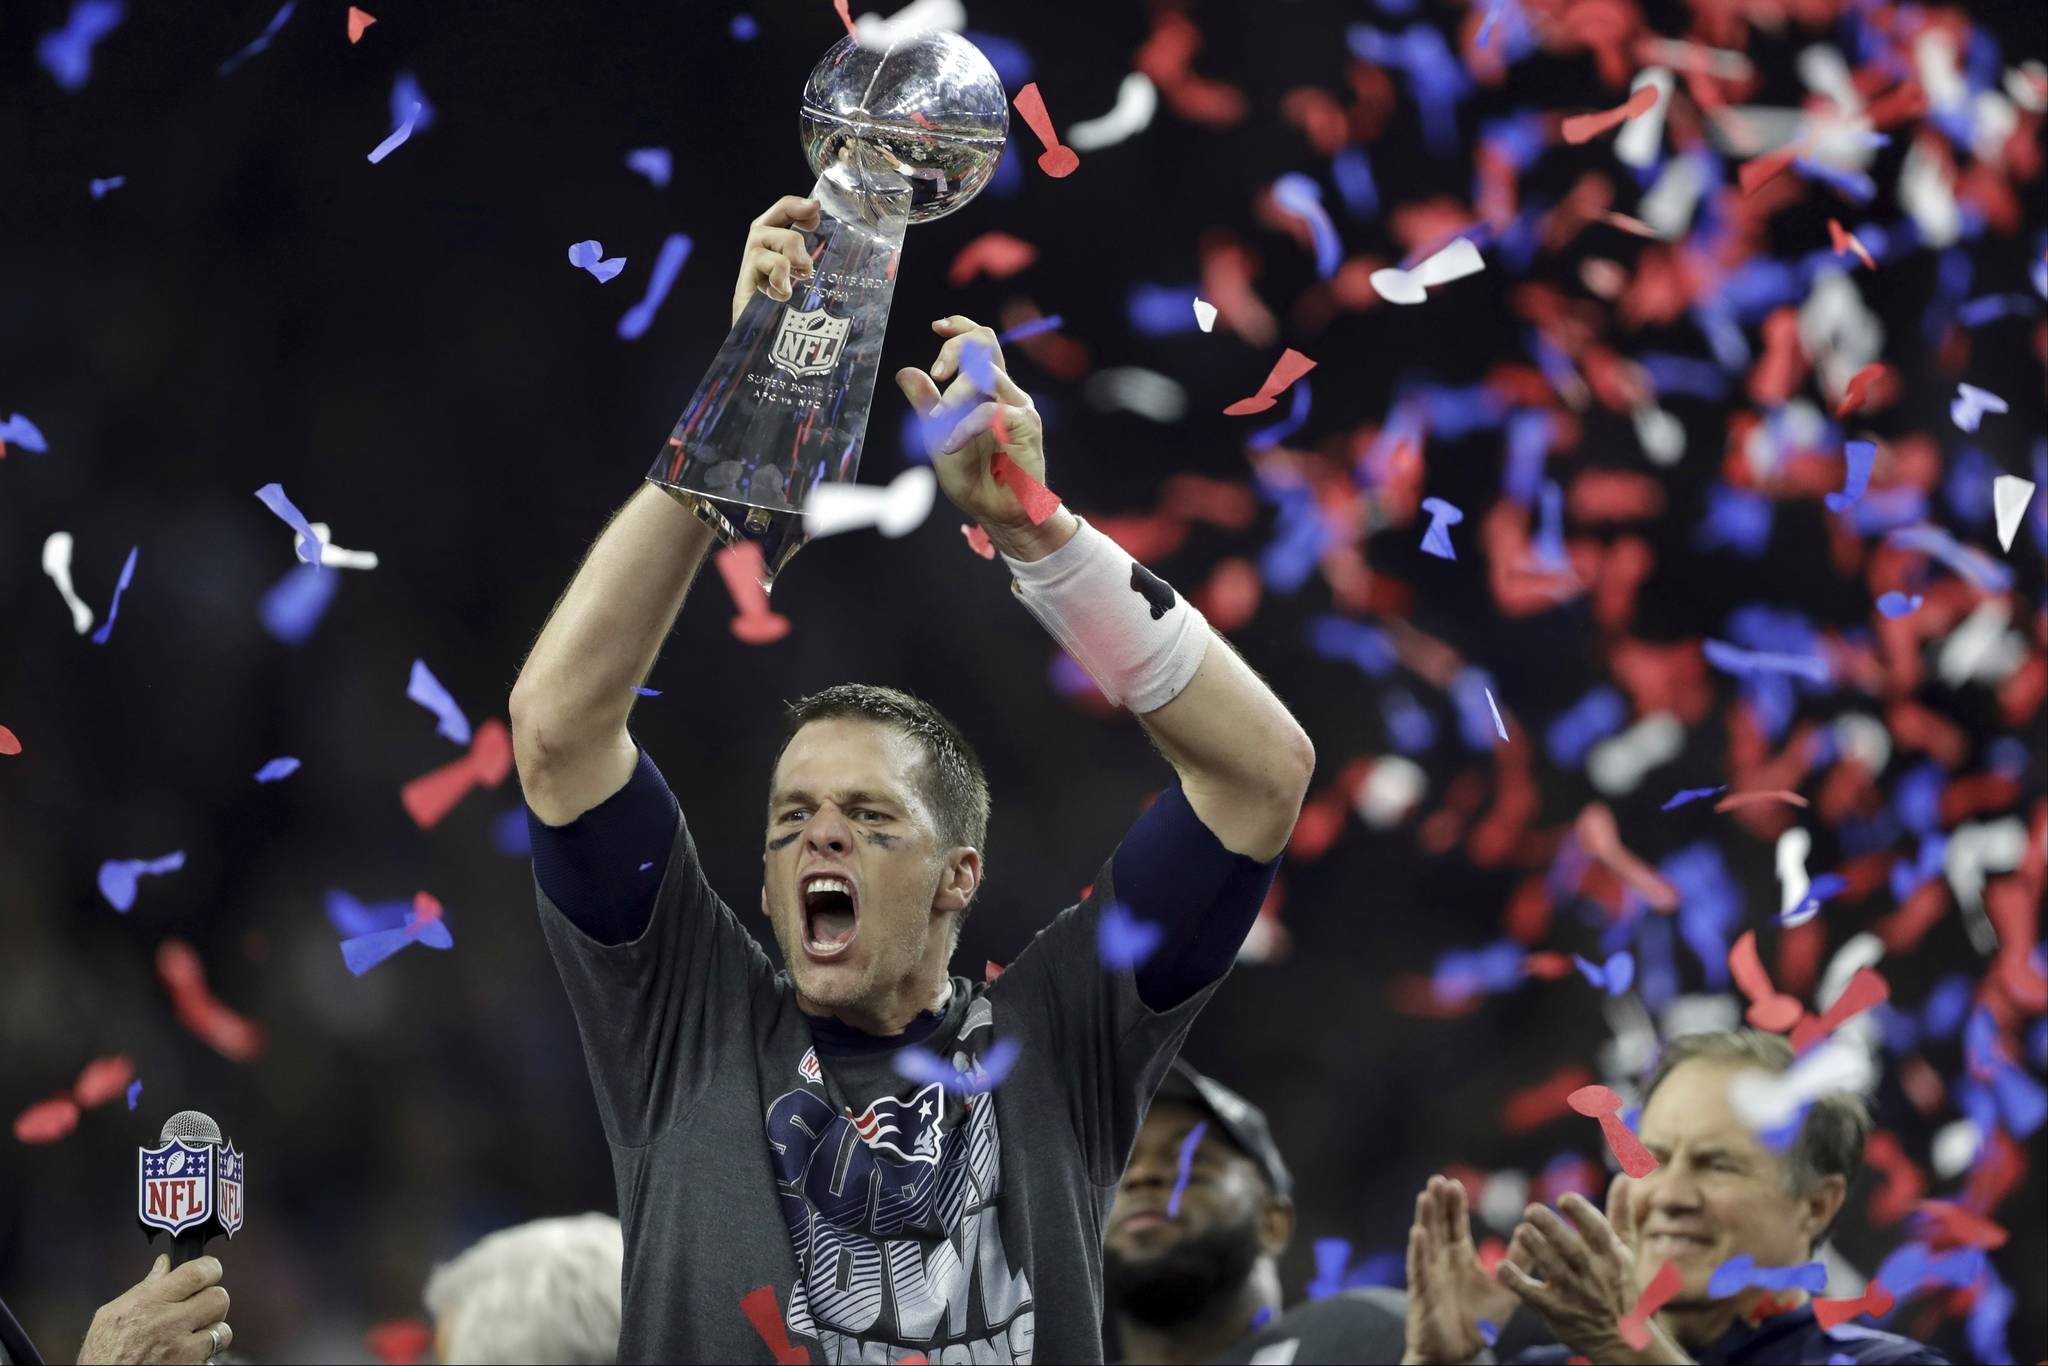 In this Feb. 5, 2017, file photo, New England Patriots’ Tom Brady raises the Vince Lombardi Trophy after defeating the Atlanta Falcons in overtime at the NFL Super Bowl 51 football game, in Houston. With five rings Tom Brady has already established himself as the most-decorated quarterback in Super Bowl history. (AP Photo/Darron Cummings, File)